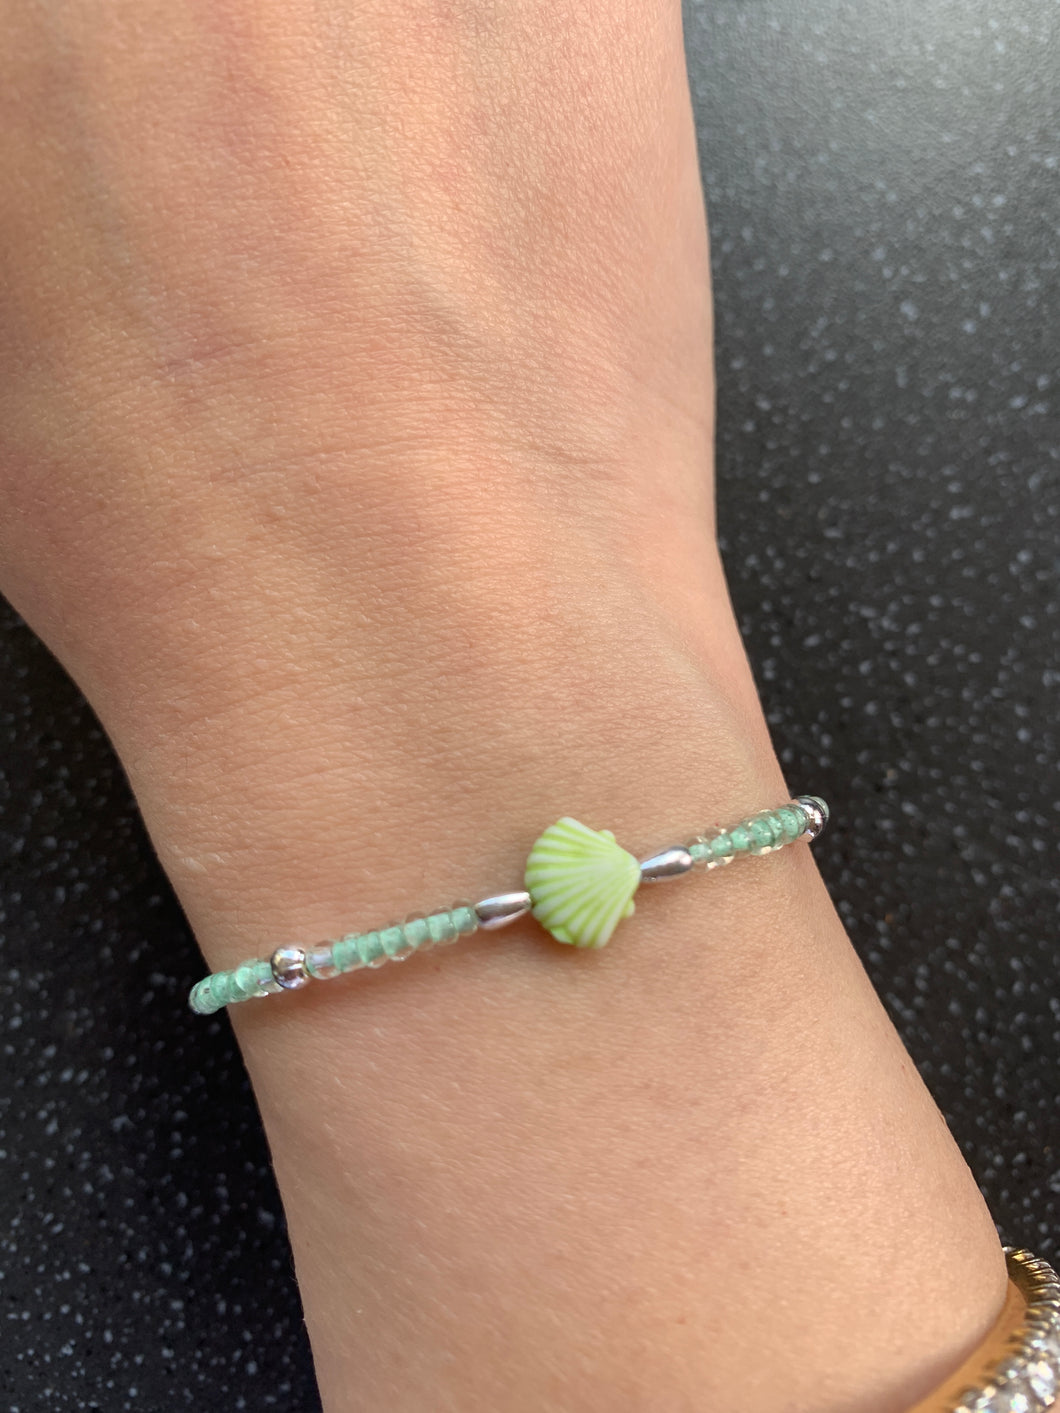 Consistency From Your person, Communication, Emotionally Available & Understanding Green Shell Intention Manifesting Tie Bracelet